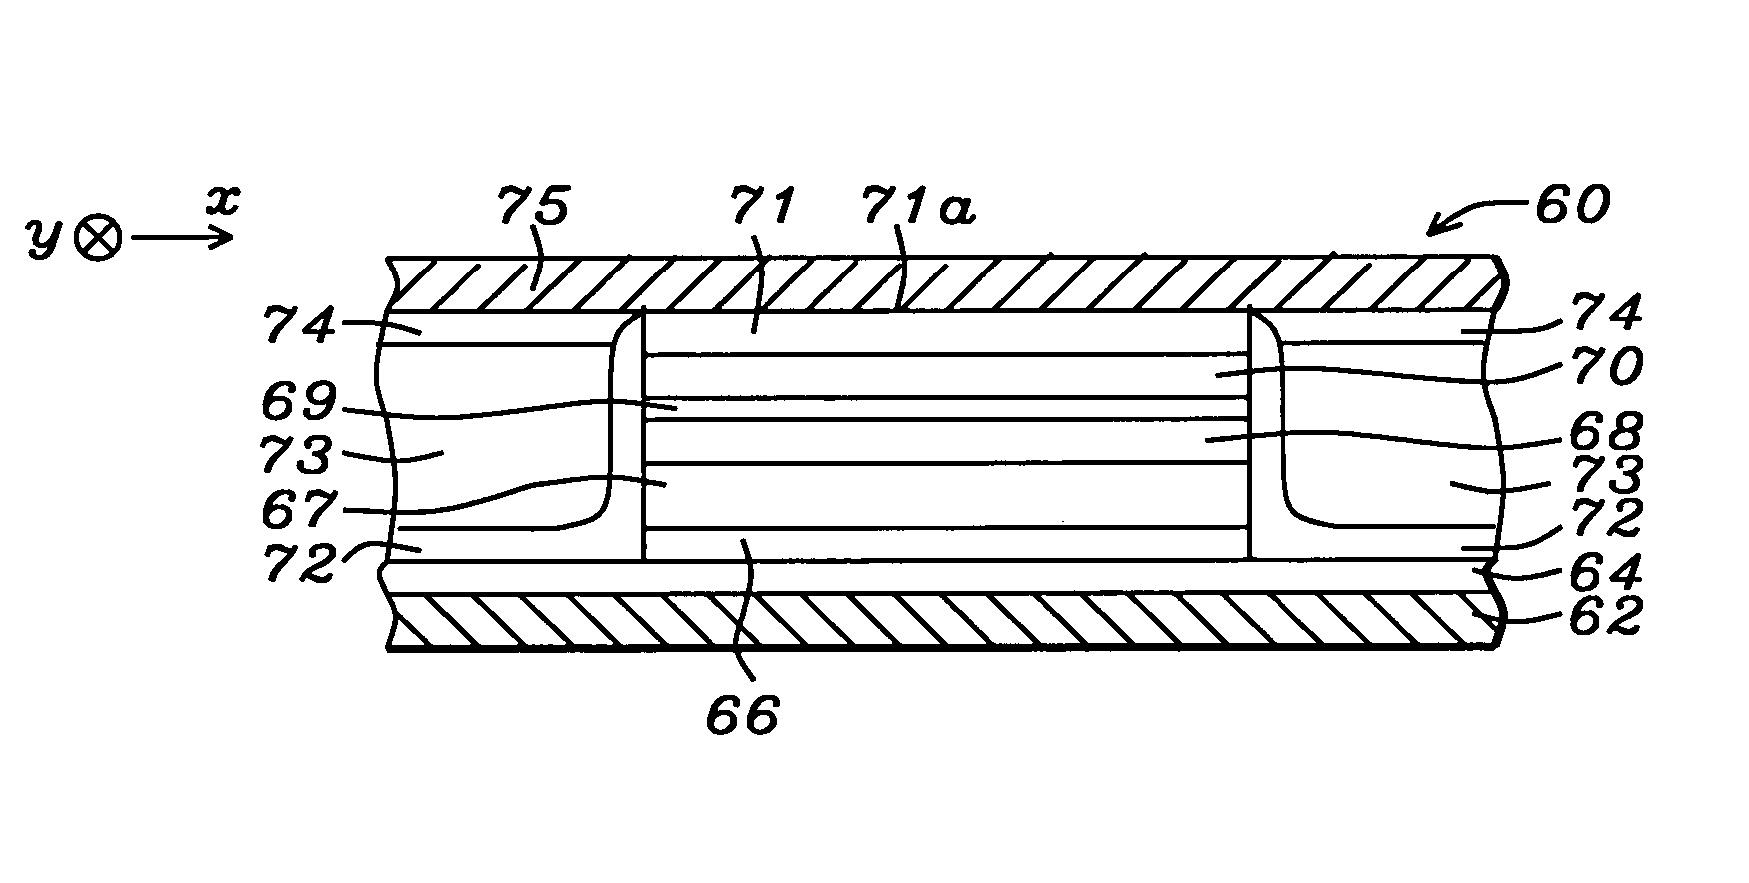 Capping structure for enhancing dR/R of the MTJ device